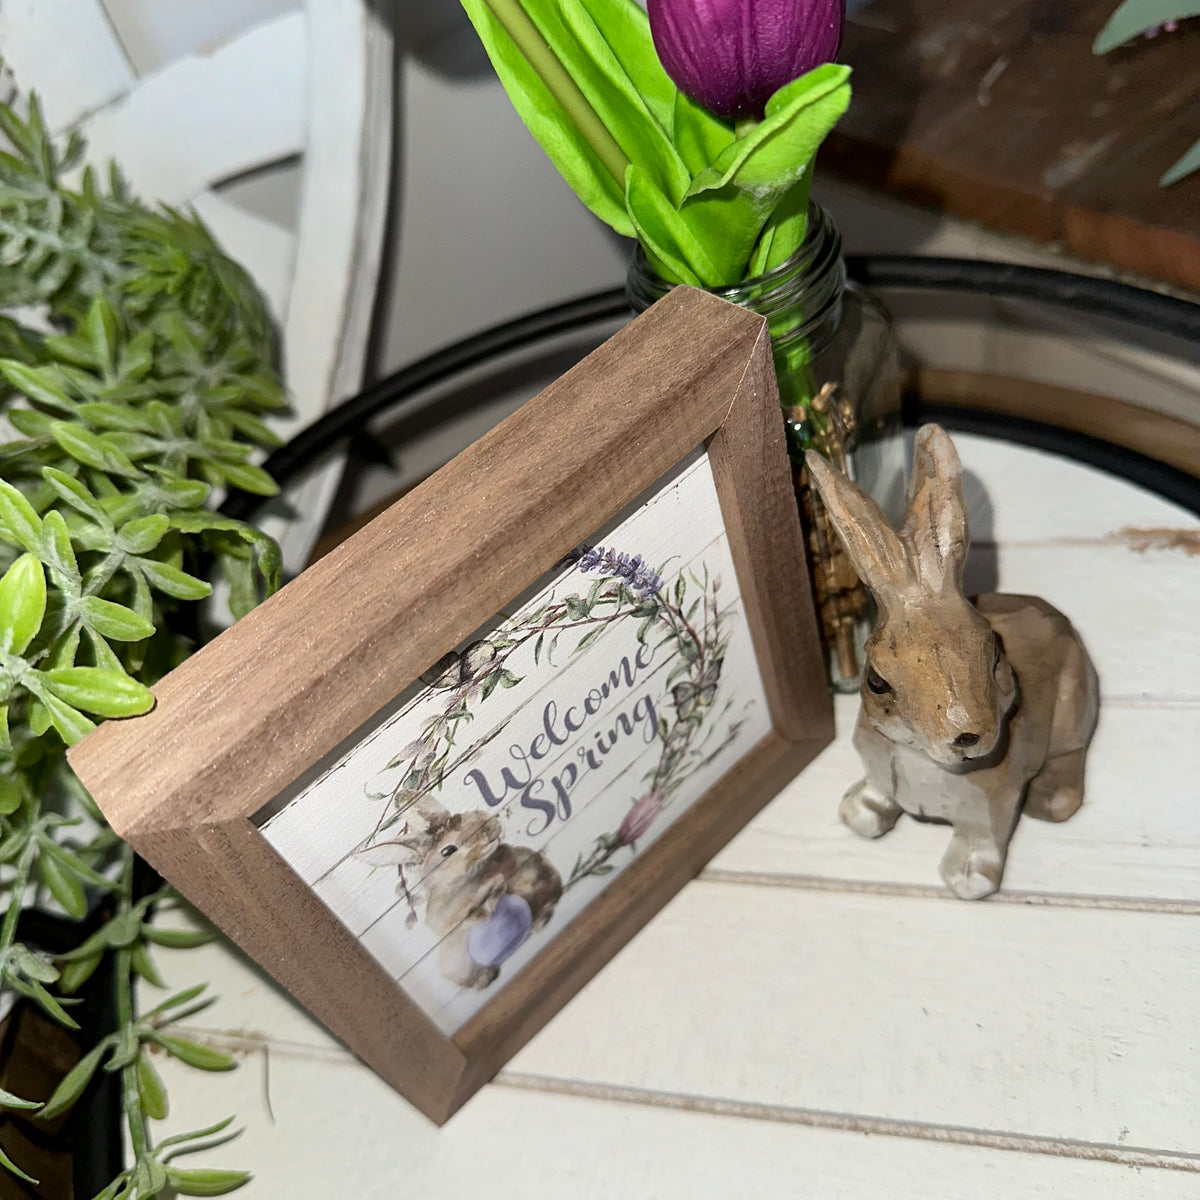 Welcome Spring | Bunny {Gift Box}